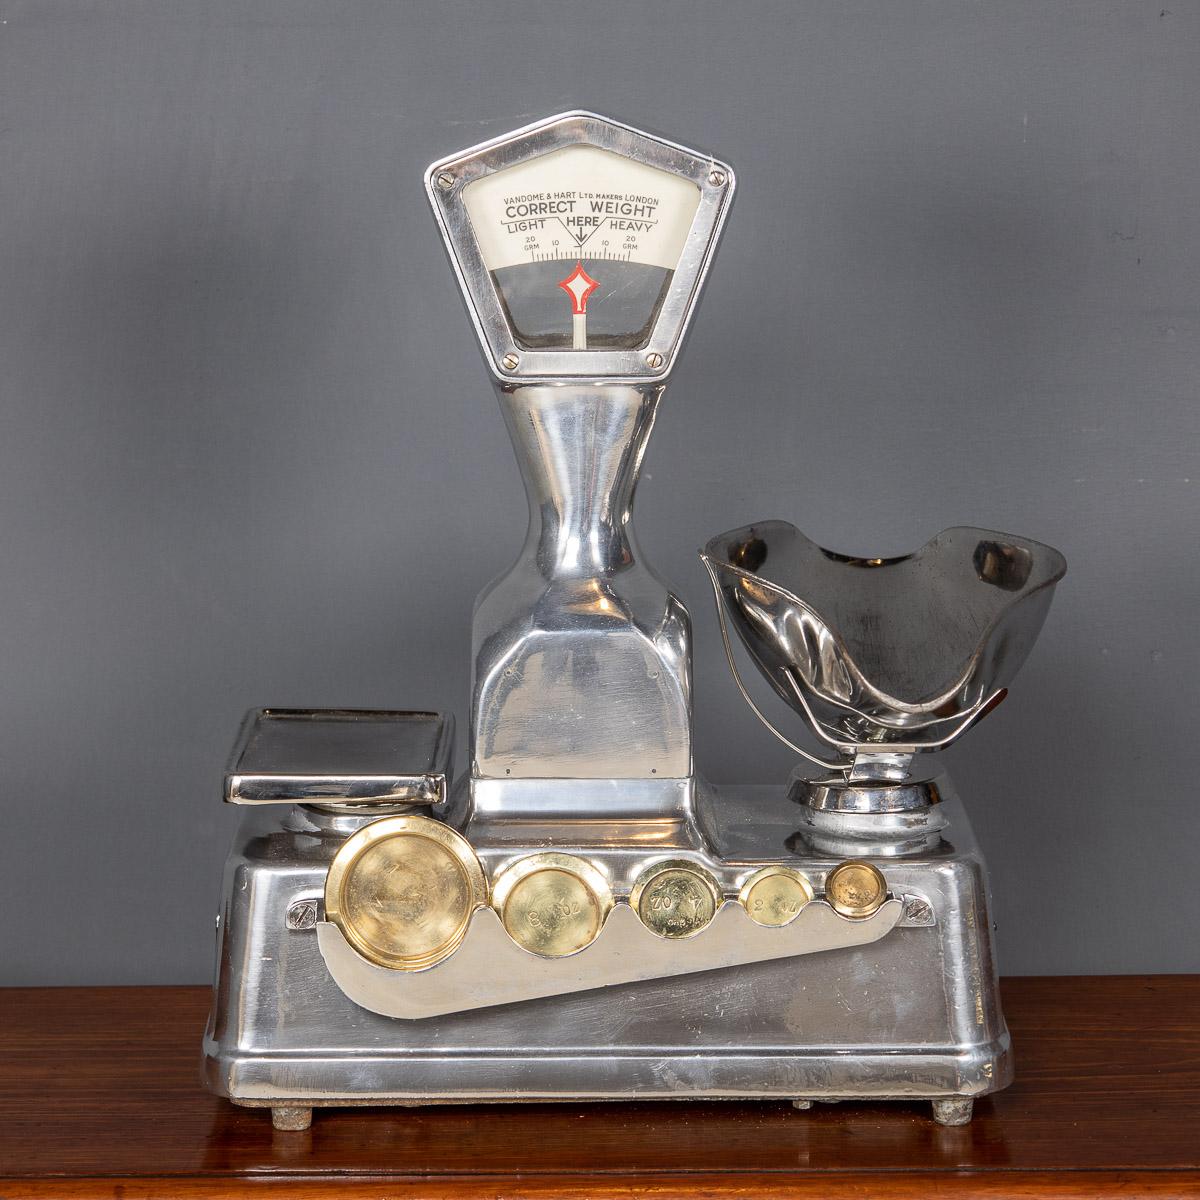 A set of mid-20th century scales, highly polished with original scoop and brass weights, by Vandome & Hart Ltd of London, this company was originally founded in 1660 and is the oldest weighing machine company in the UK.

Condition
In great